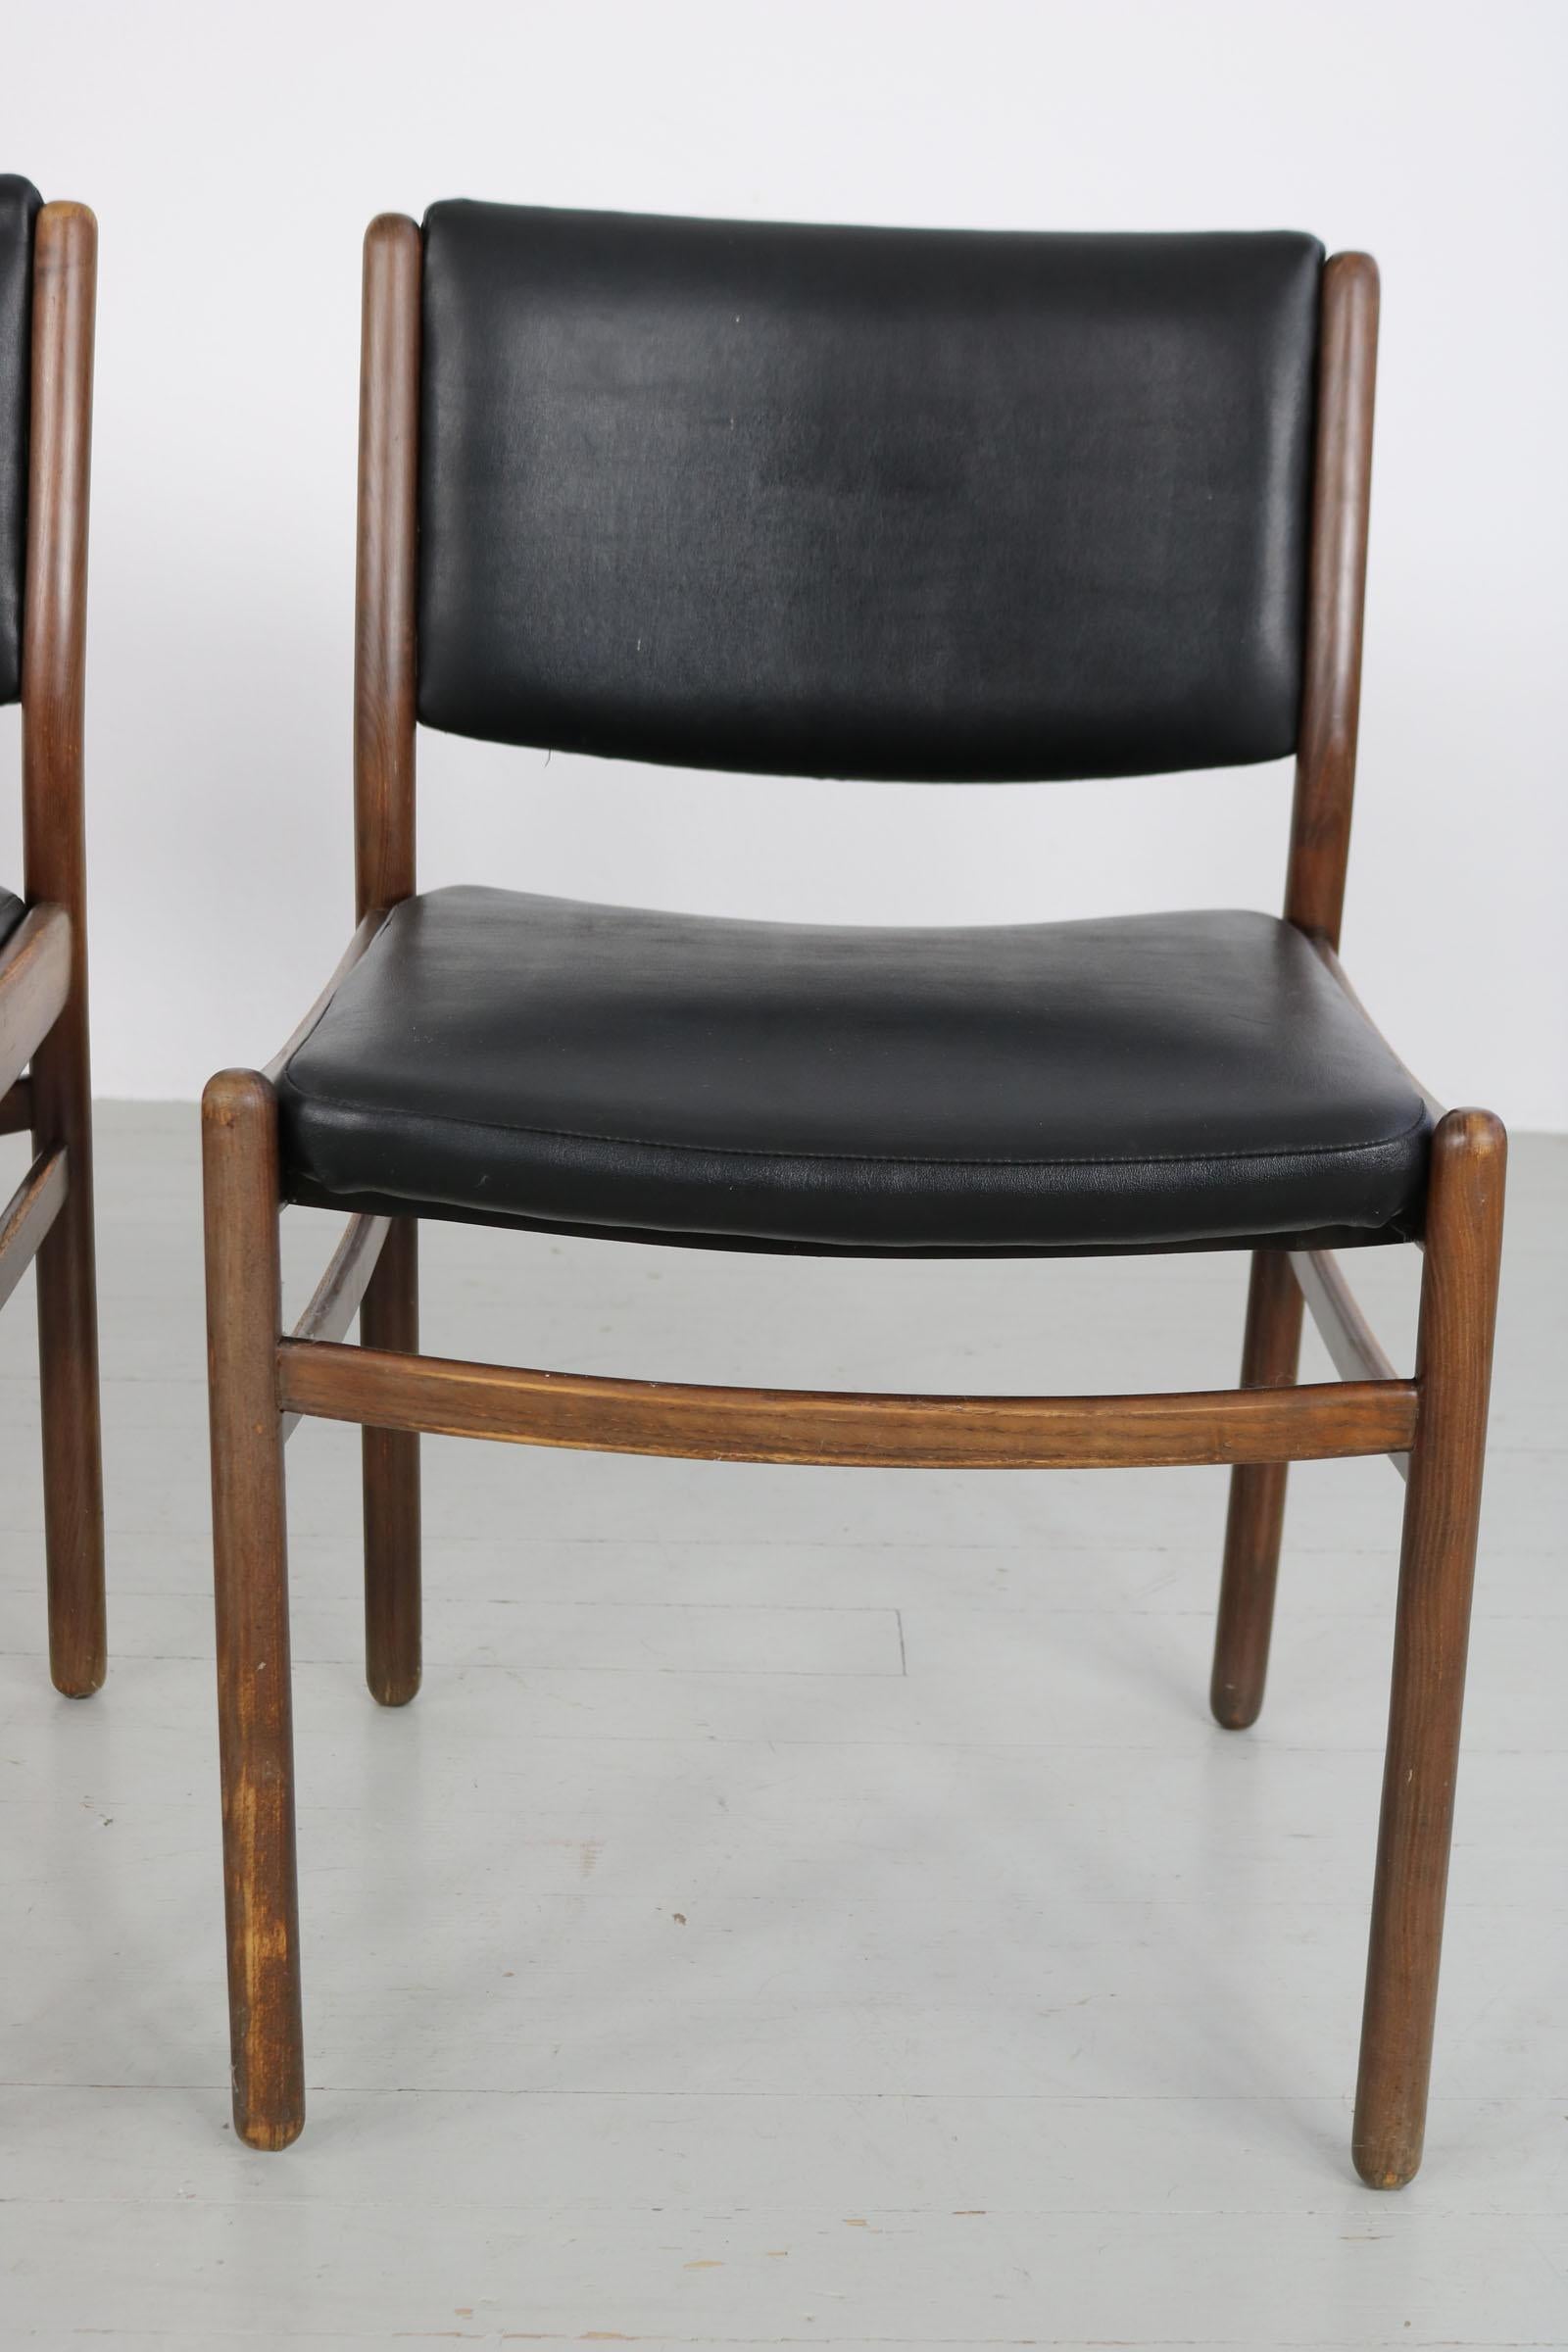 Set of Three Wooden Chairs with Black Leatherette Upholstery, Italy 60s For Sale 4